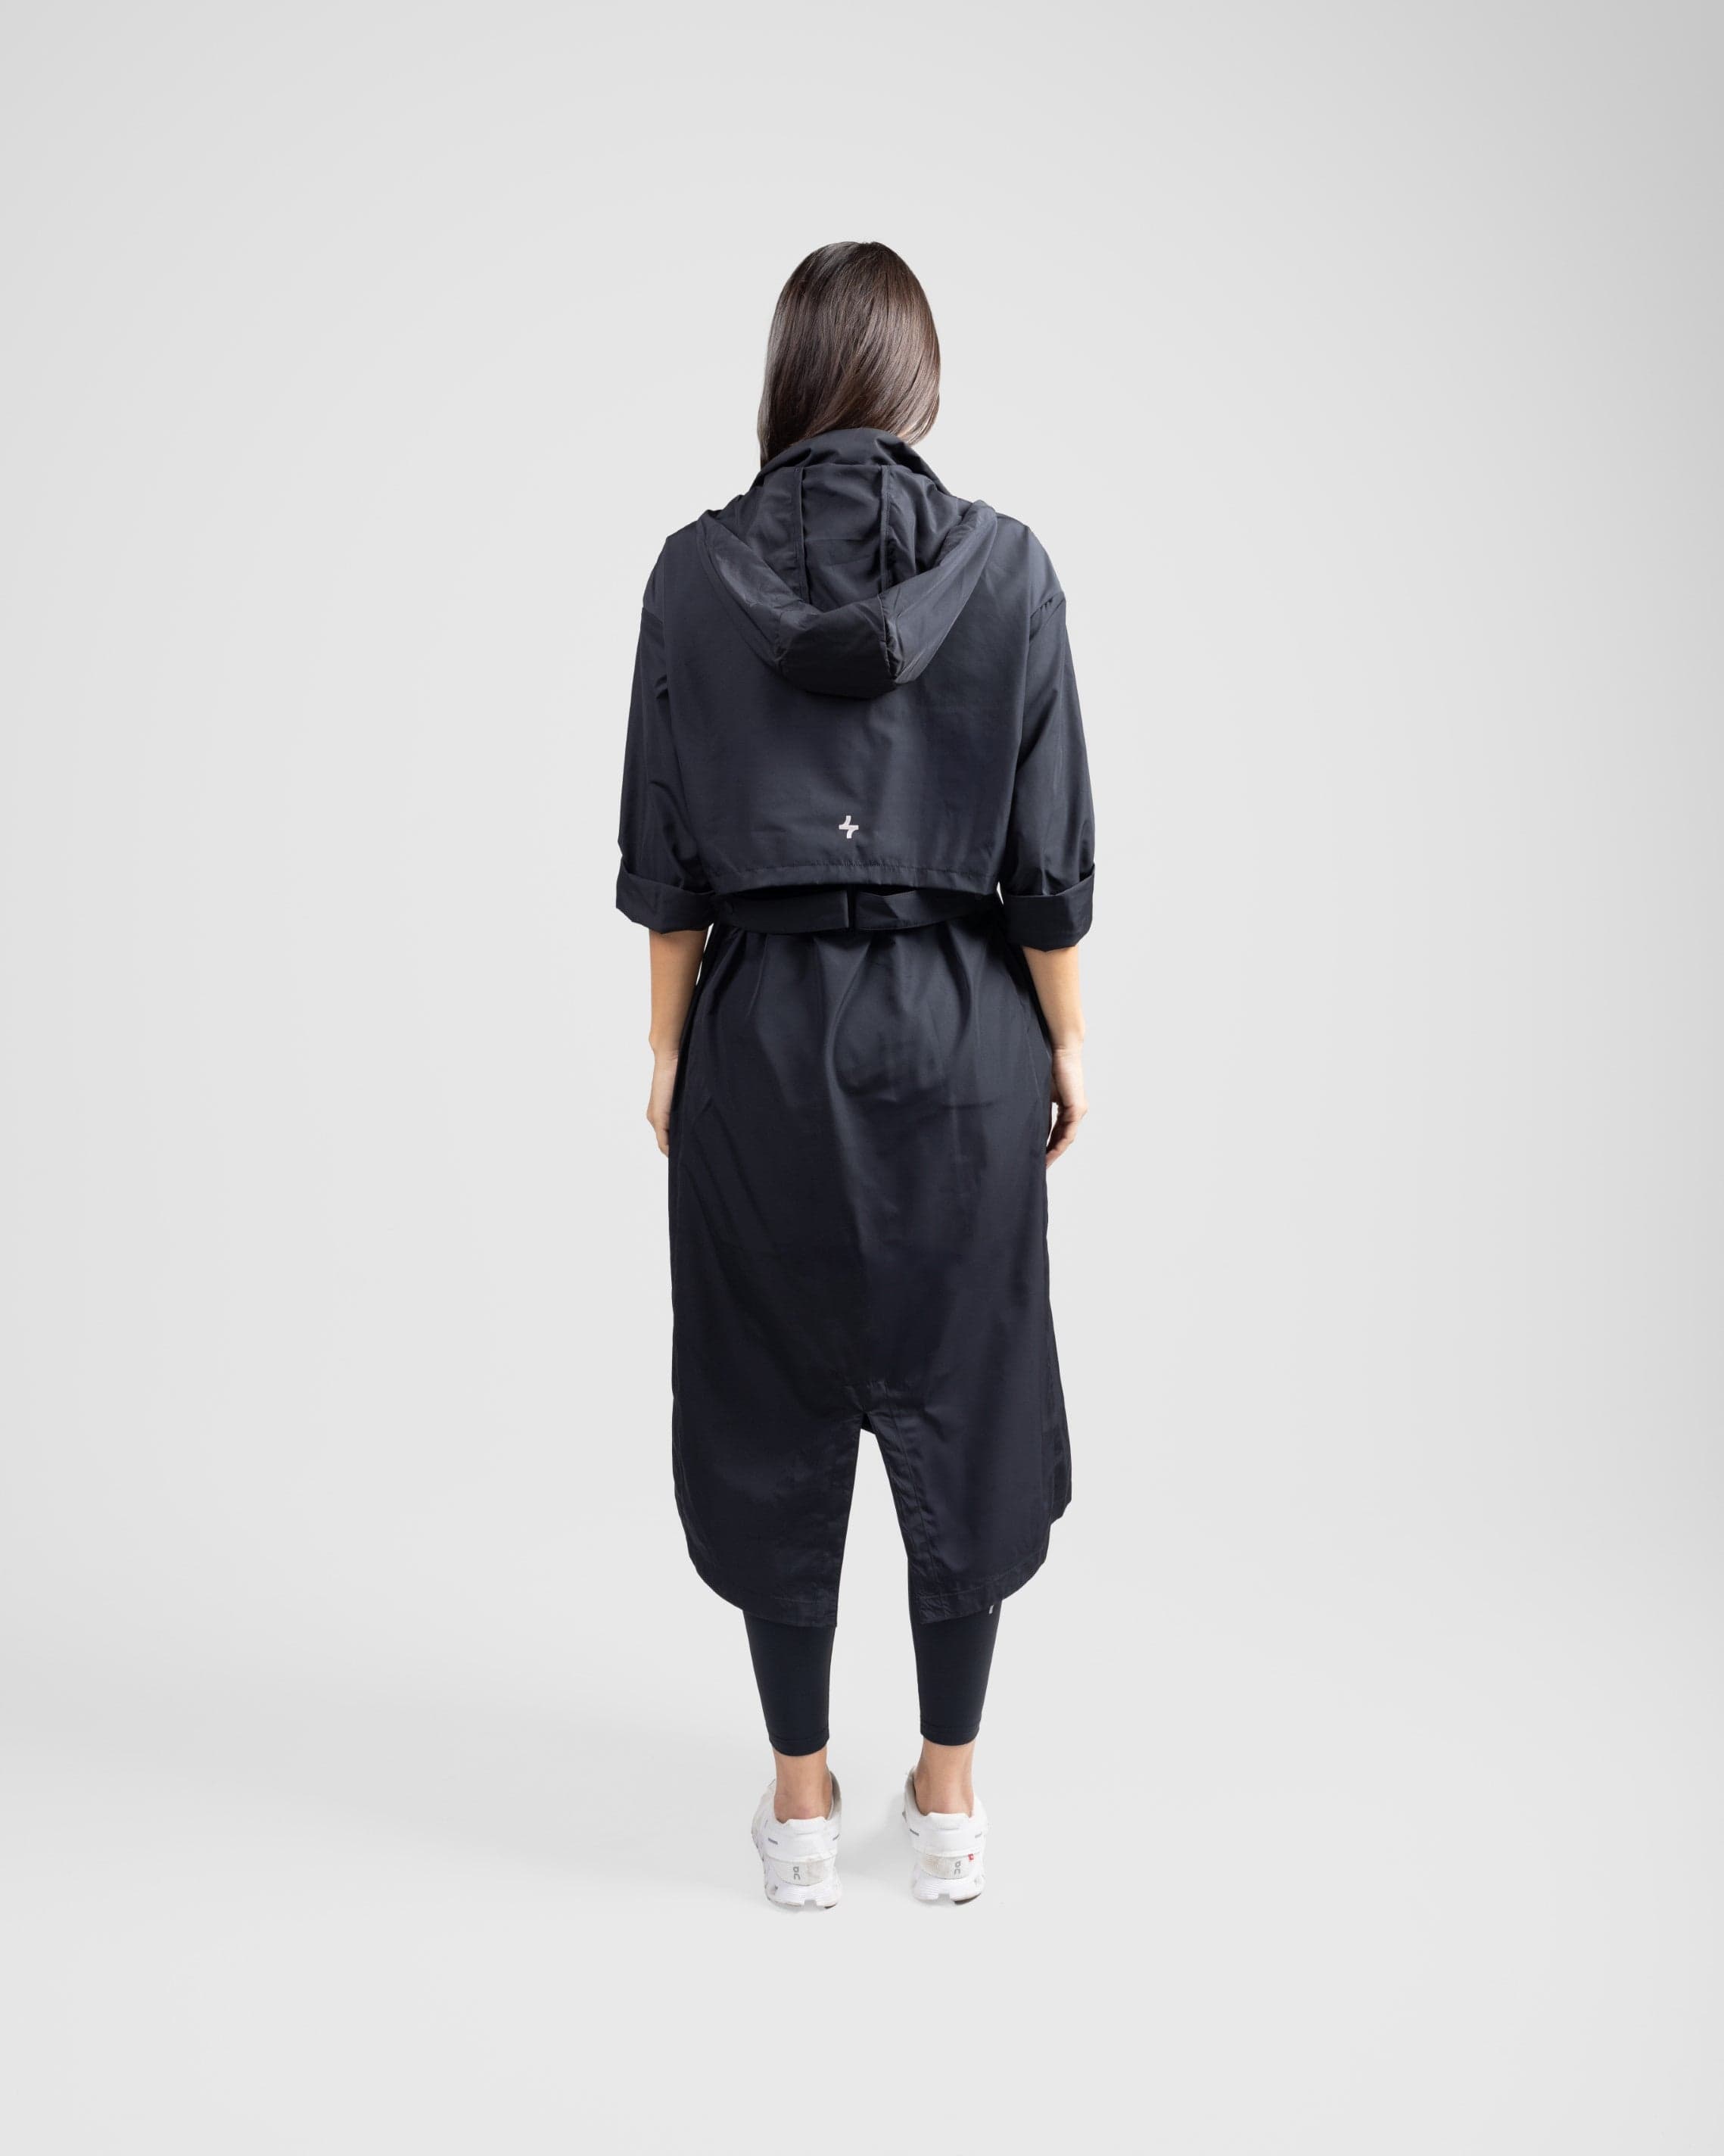 A model from behind wearing a modest black MAK LIGHT PARKA by Qynda with a hood and white breathable mesh sneakers, walking to the right on a plain light gray background.